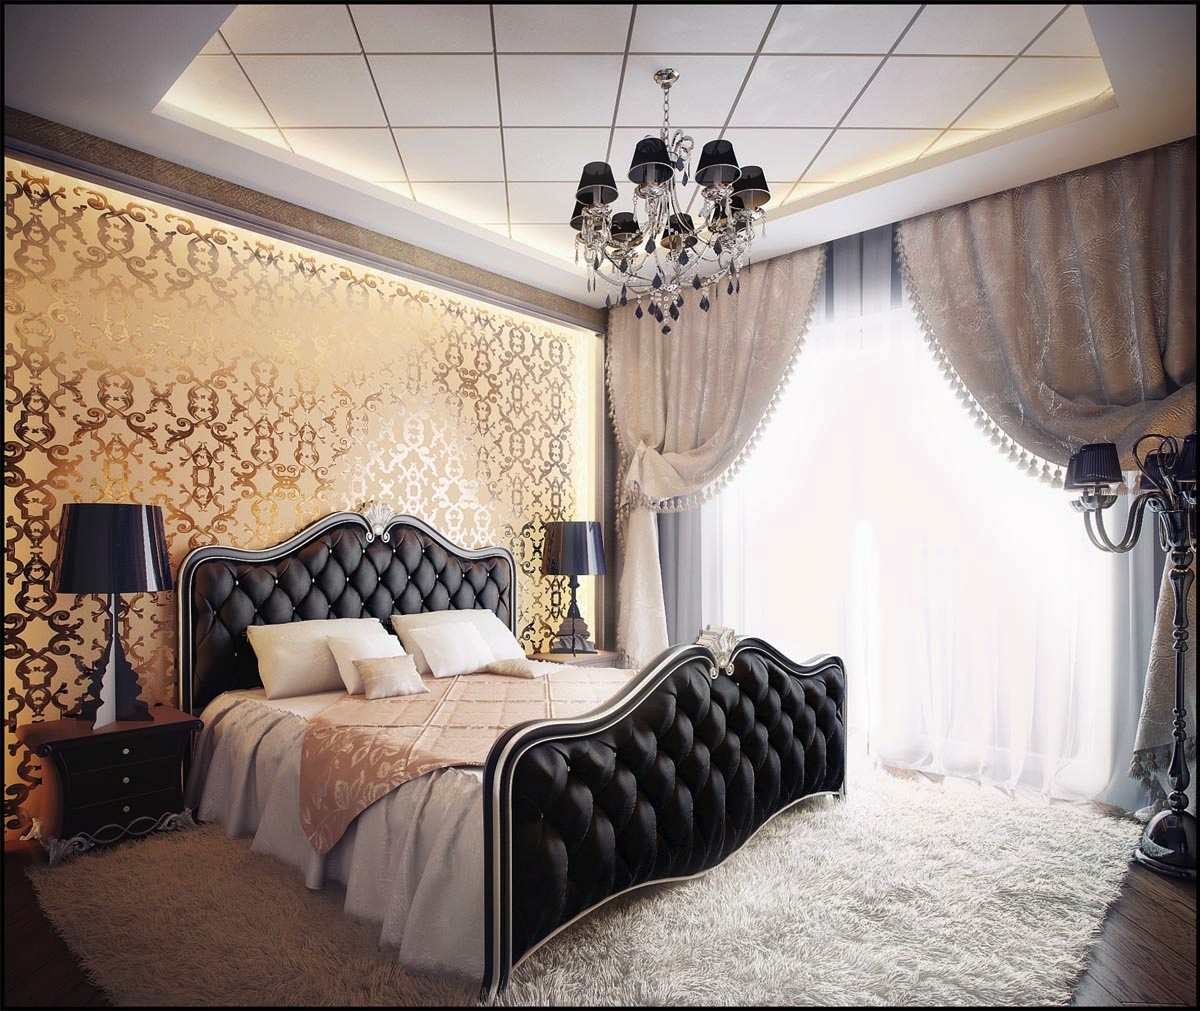 The Luxurious Metallic Gold Wallpaper In This Setting Screams Opulence